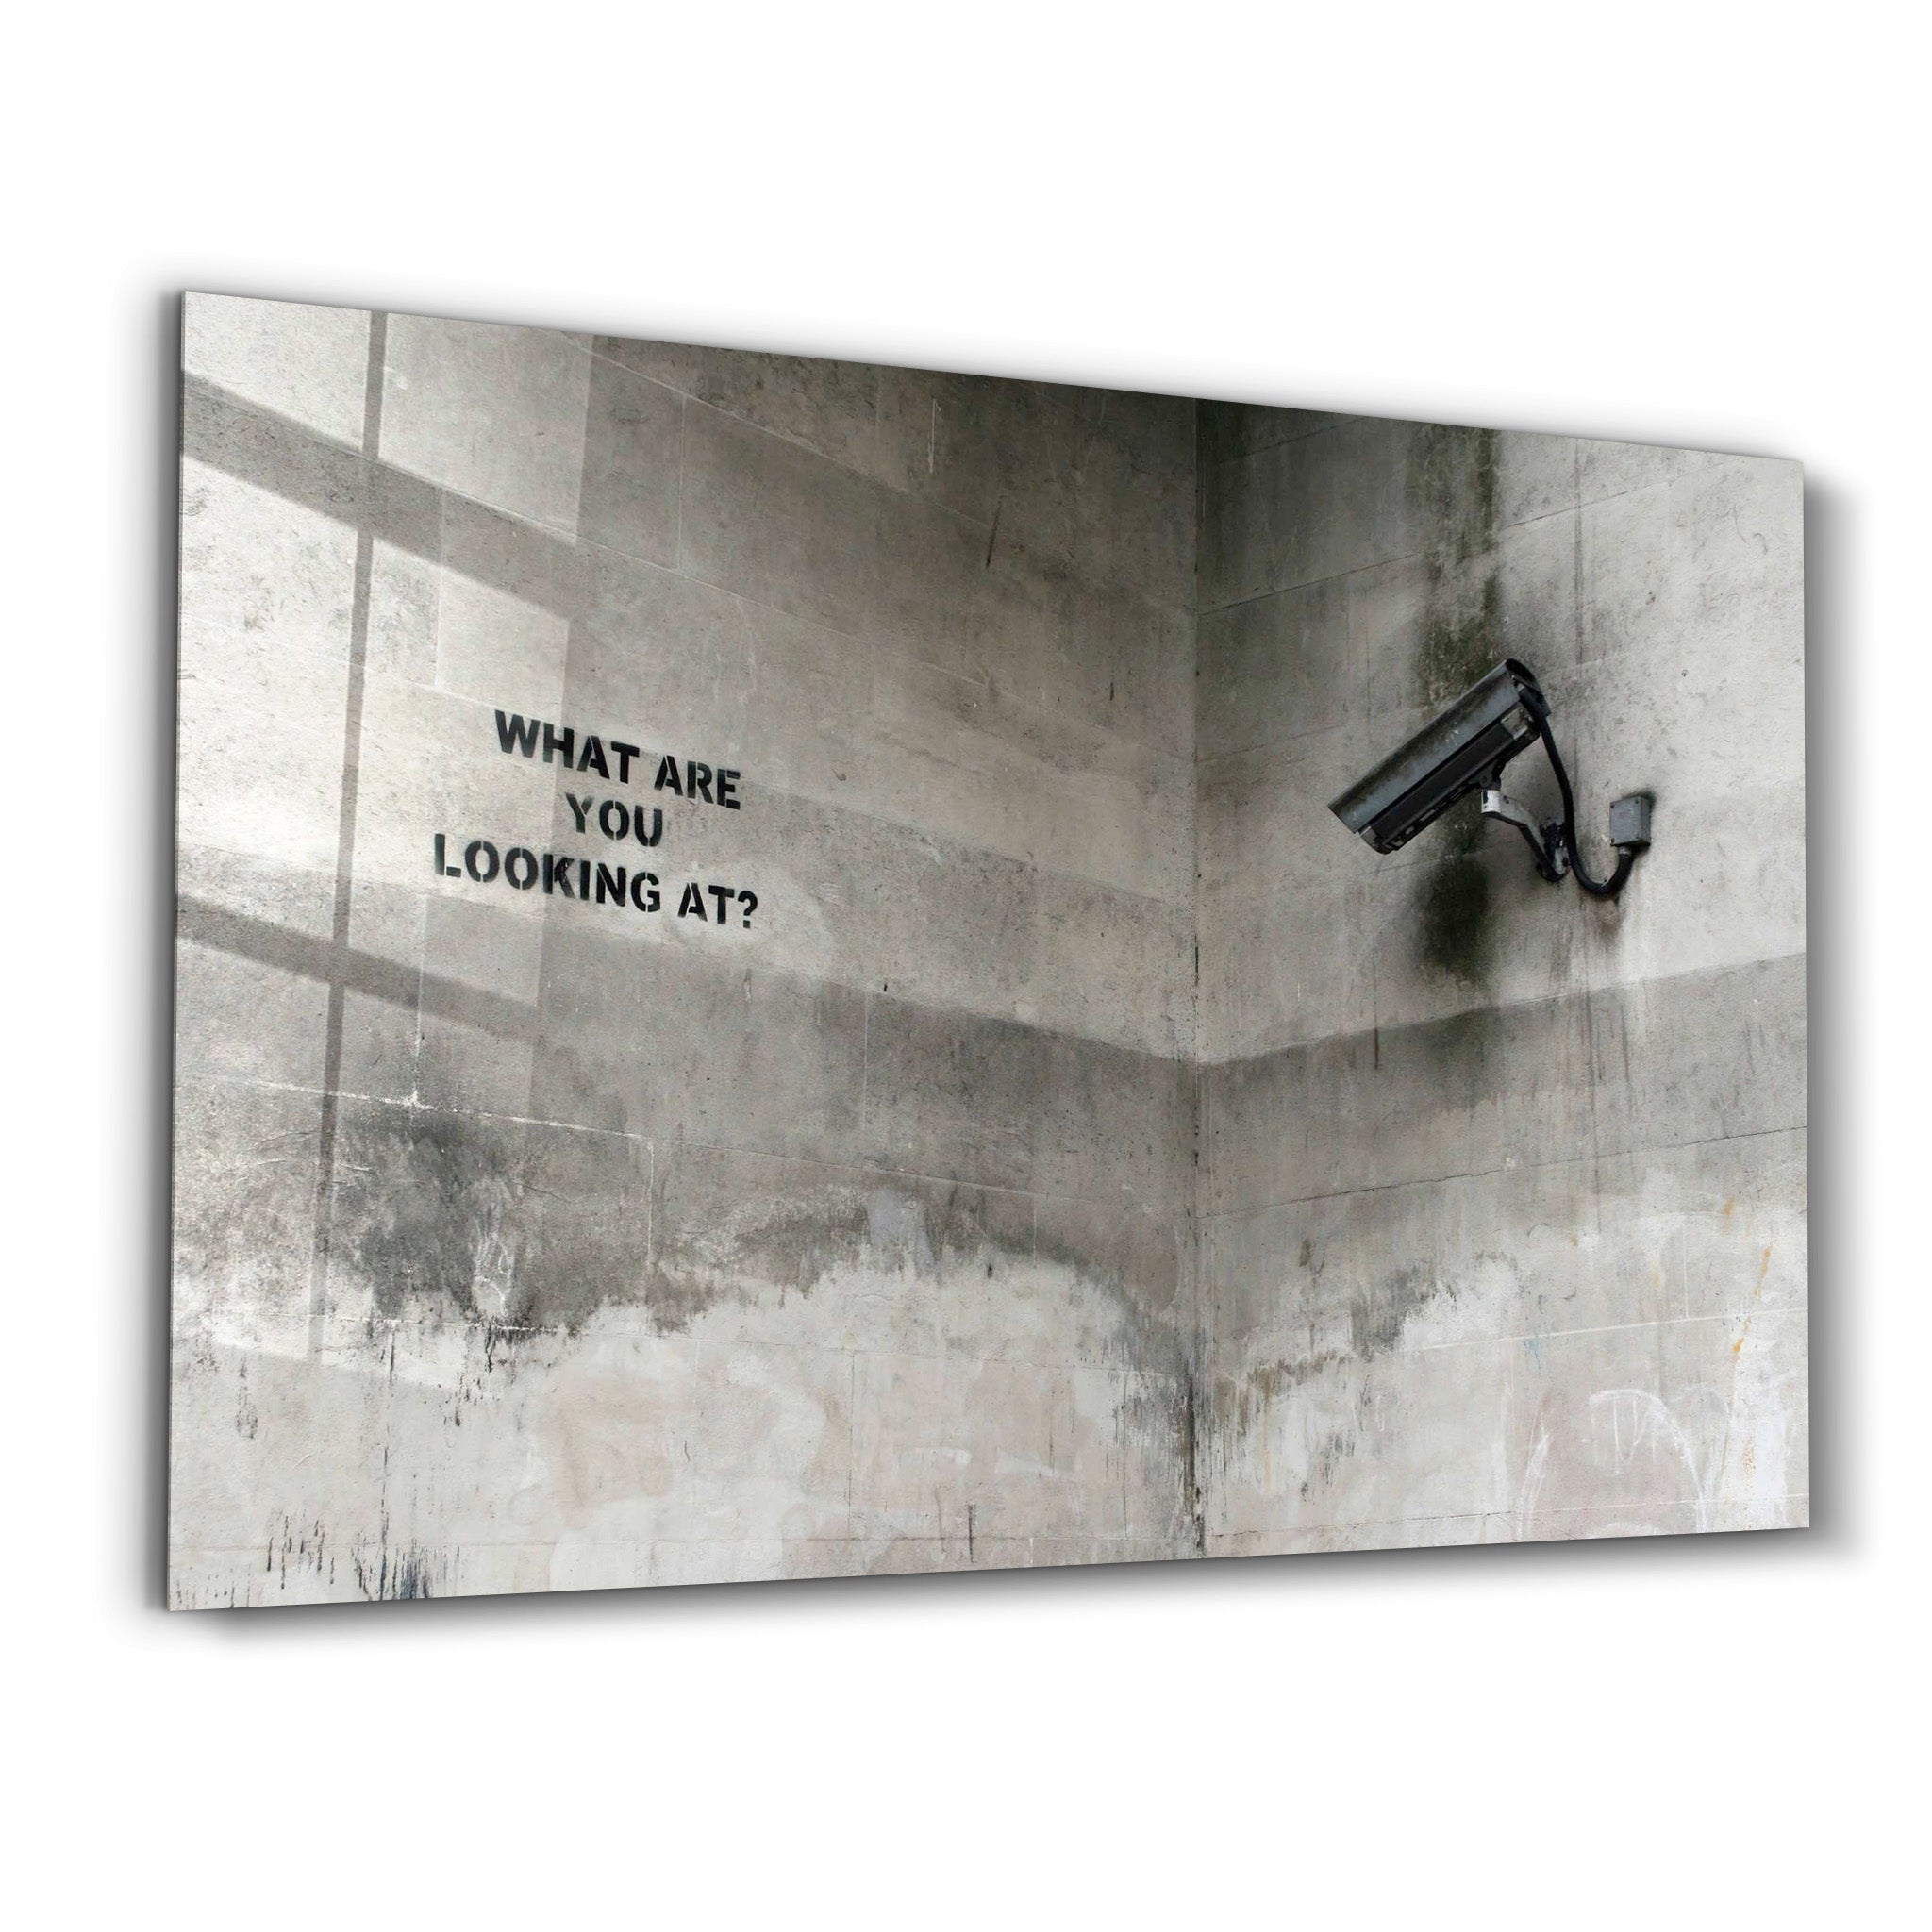 ・"Banksy - What Are You Looking At?"・Designer's Collection Glass Wall Art - ArtDesigna Glass Printing Wall Art